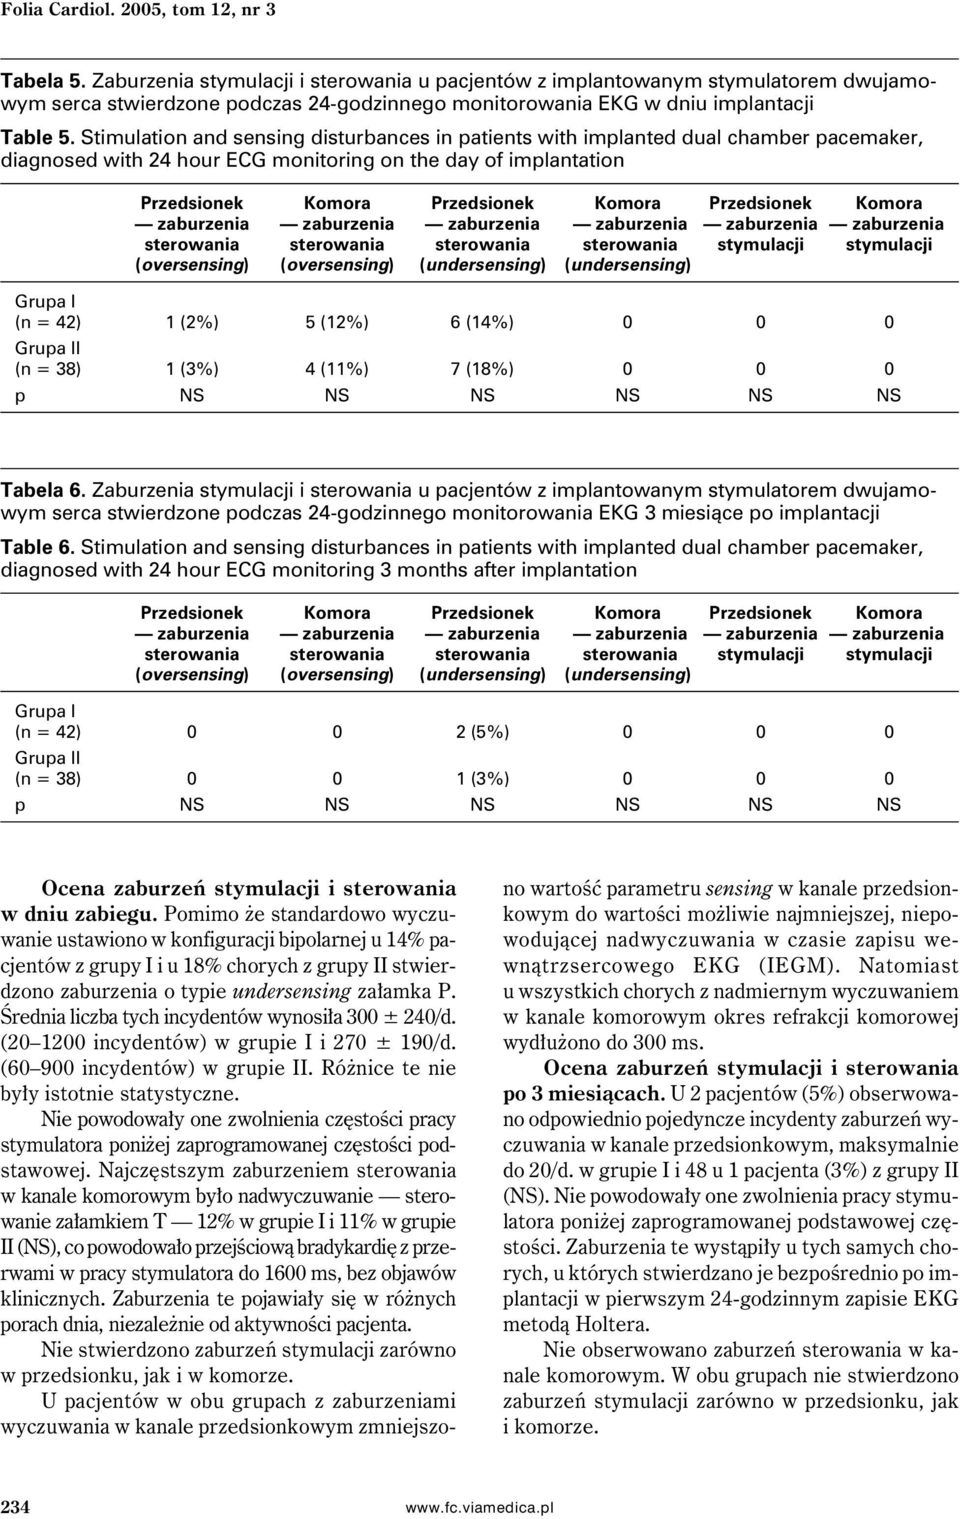 Stimulation and sensing disturbances in patients with implanted dual chamber pacemaker, diagnosed with 24 hour ECG monitoring on the day of implantation Przedsionek Komora Przedsionek Komora